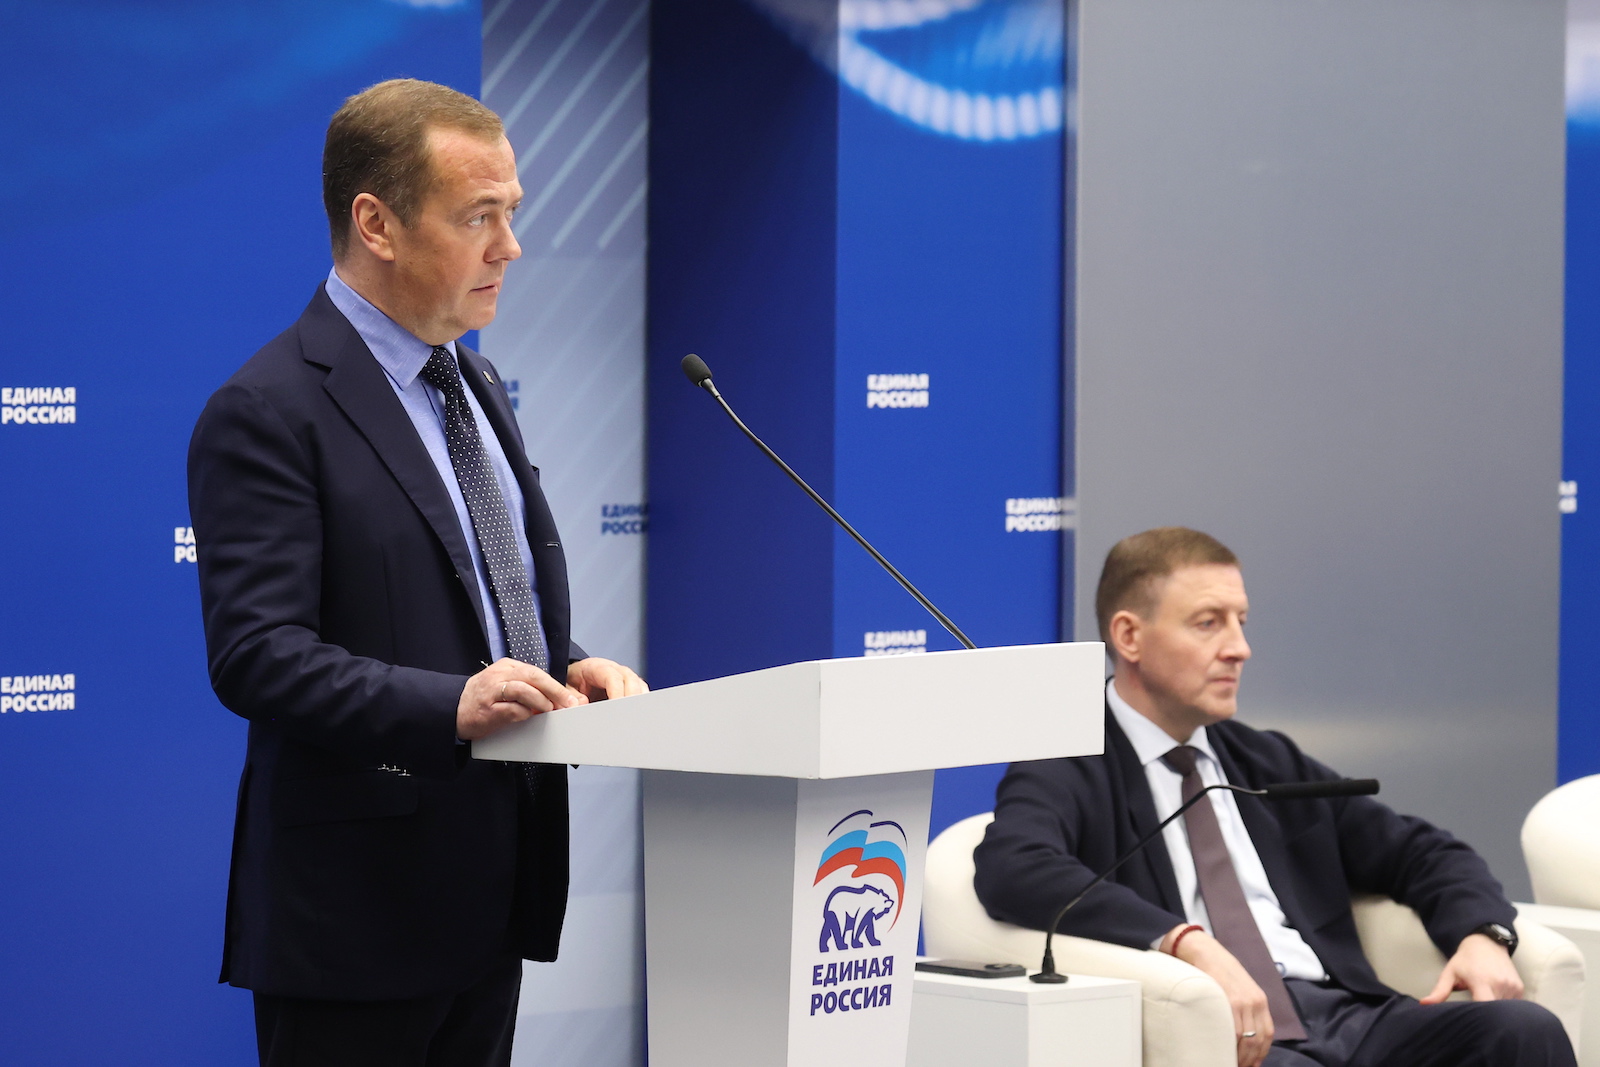 epa10726680 Deputy head of Russia's Security Council and chairman of the United Russia party, Dmitry Medvedev (L) delivers a speech as United Russia Party's General Council Secretary, Russian Federation Council Deputy Chairperson Andrei Turchak seats near during a meeting of the United Russia Party's General Council in Moscow, Russia, 04 July 2023.  EPA/EKATERINA SHTUKINA/ SPUTNIK / GOVERNMENT PRESS SERVICE POOL MANDATORY CREDIT